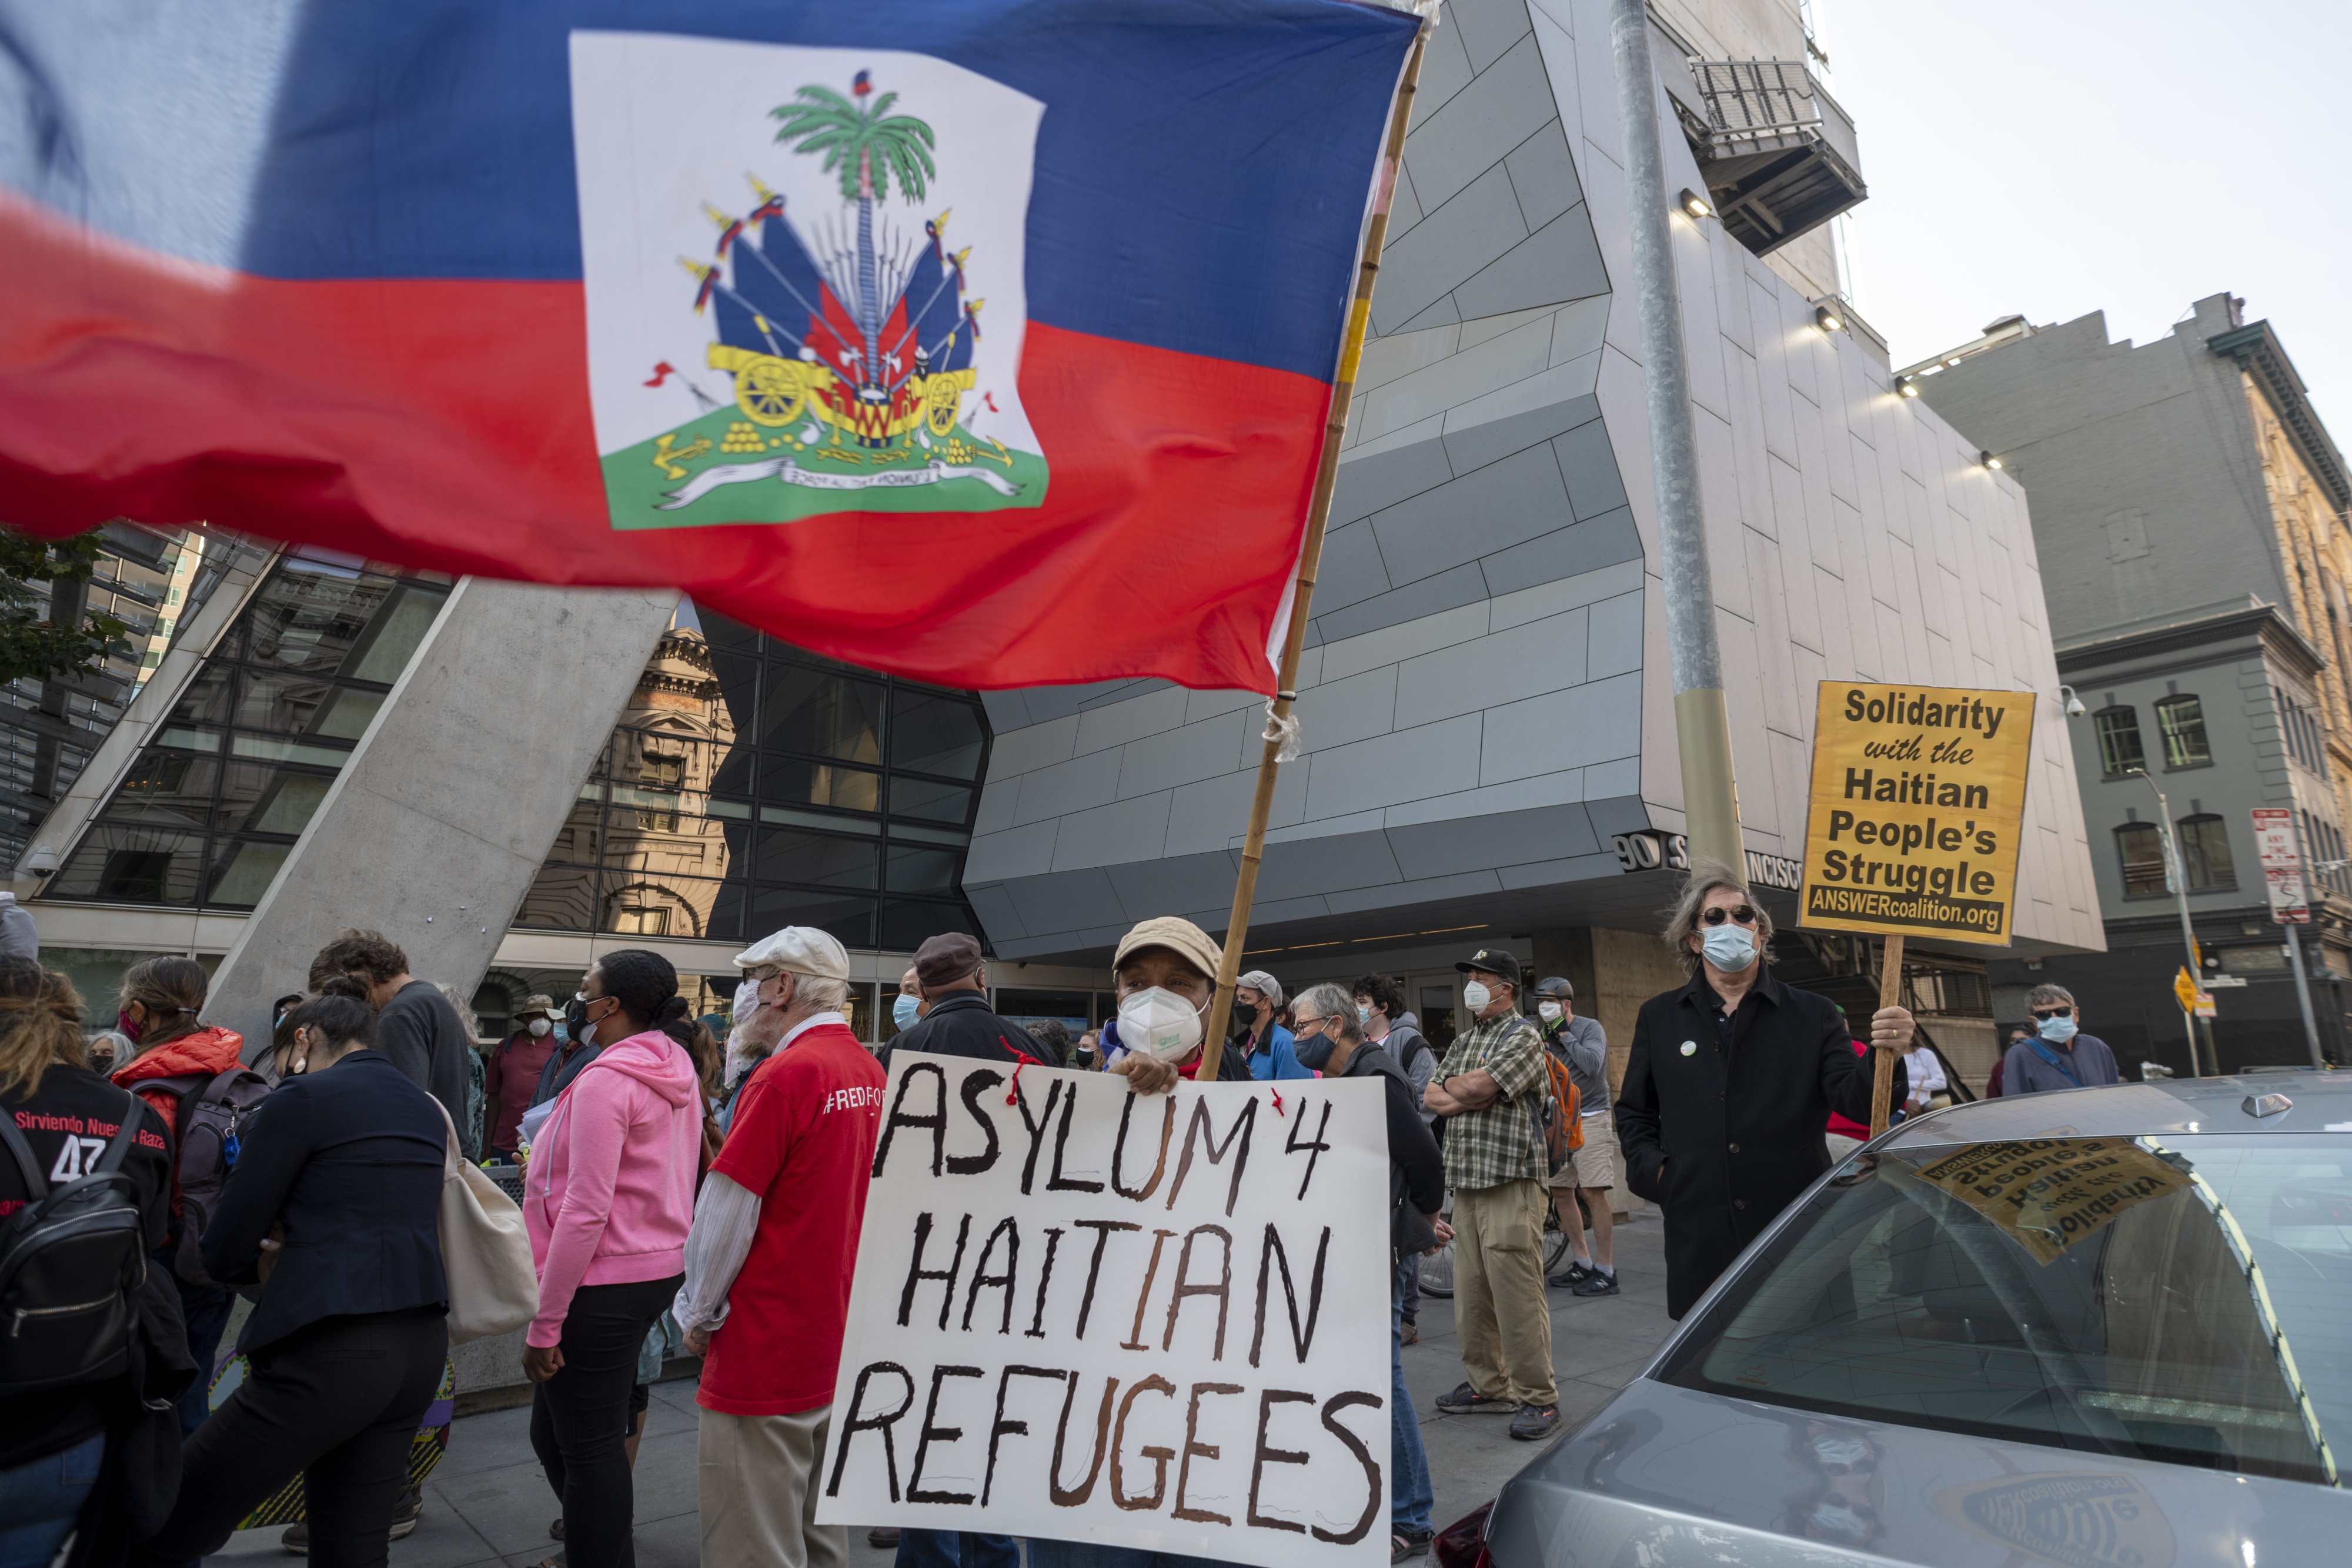 People gather in front of the San Francisco Federal Building to protest the Biden administration's handling of the Haitian refugee crisis in San Francisco, California, US, September 24, 2021.